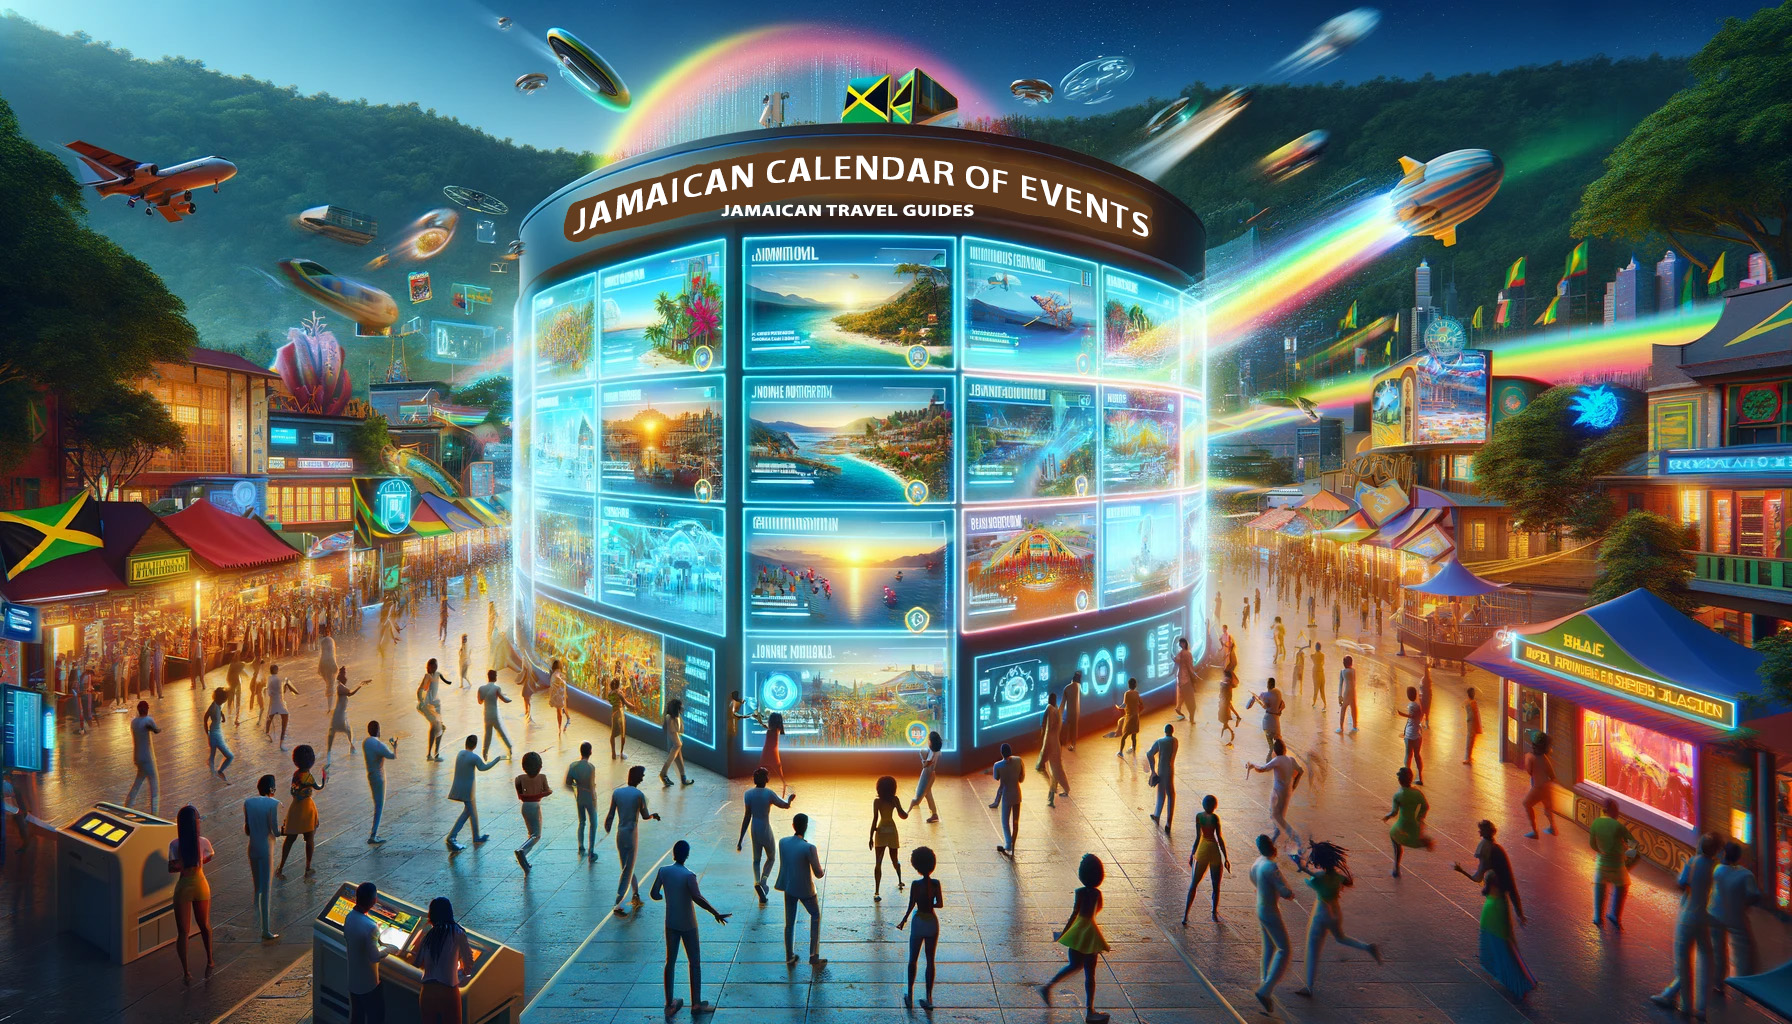 Jamaican Calendar Of Events - Jamaican Travel Guides